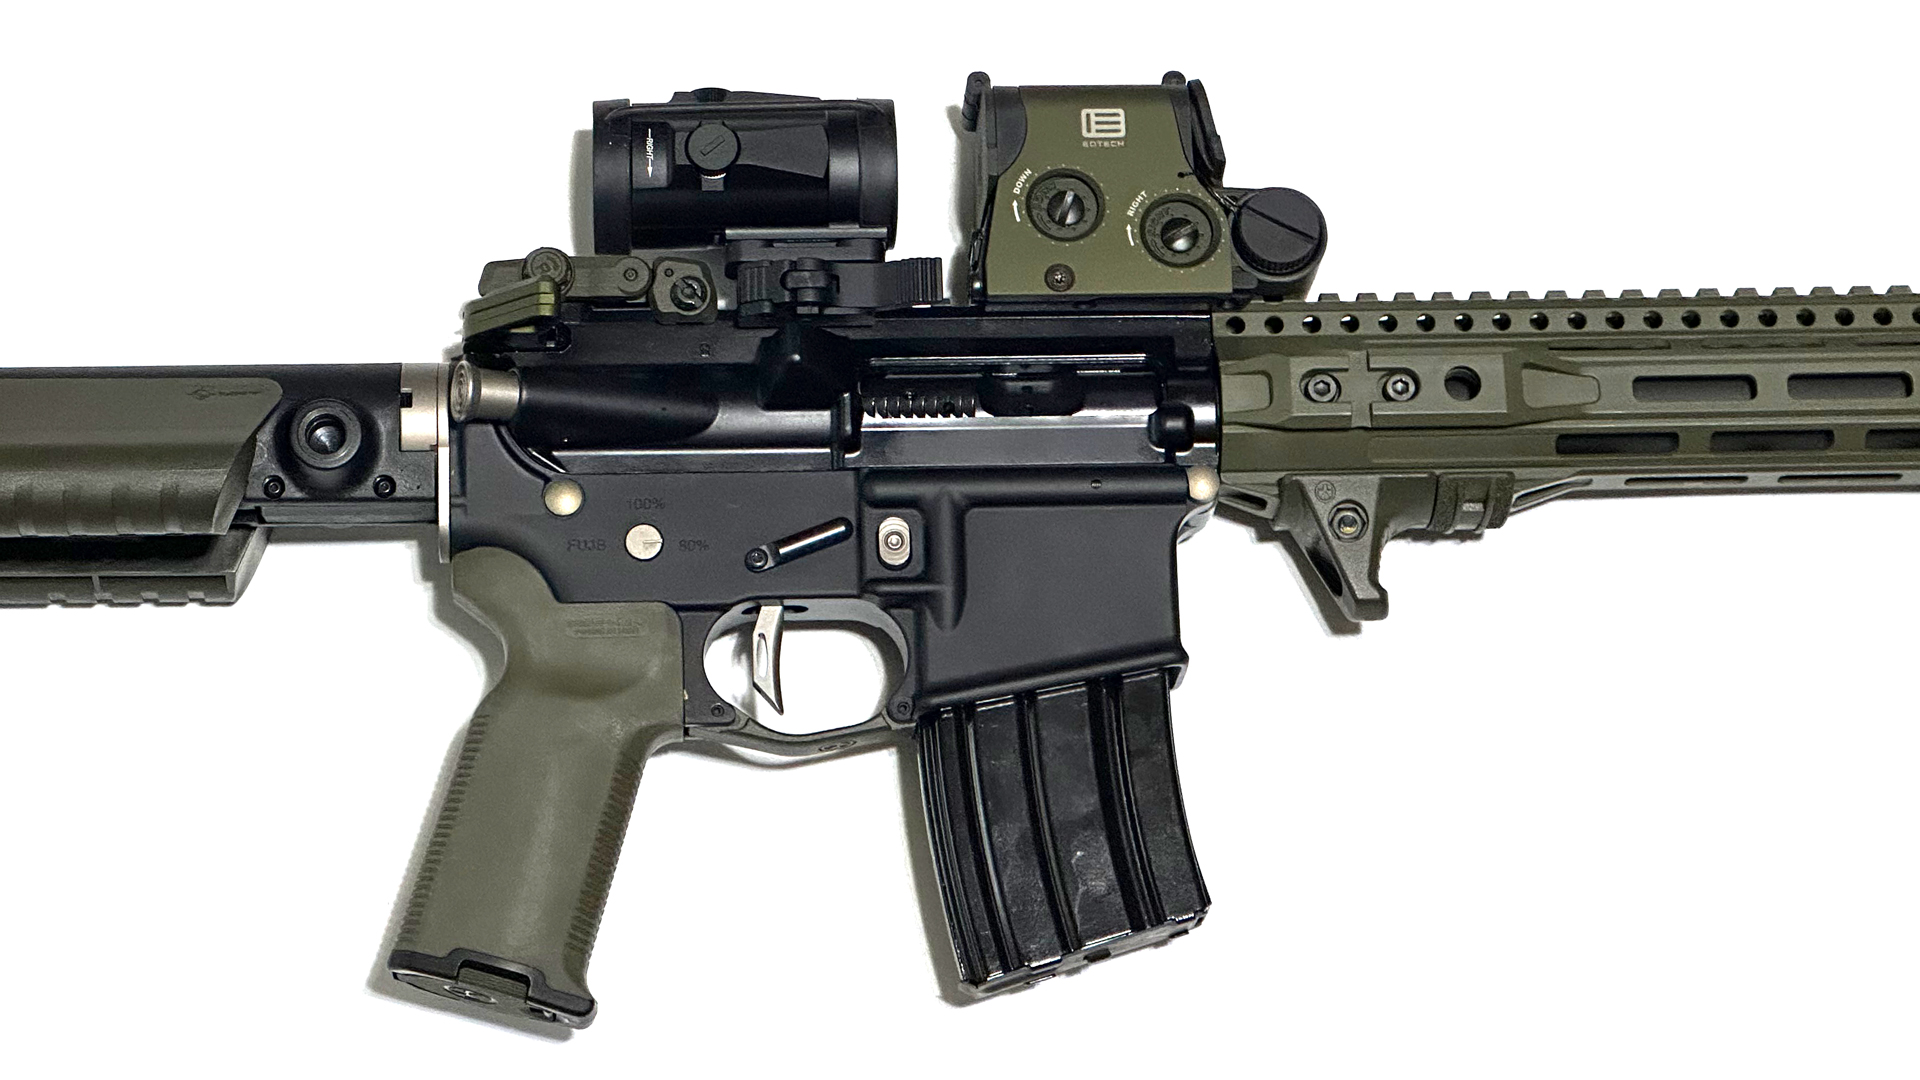 Olive Drab Green appointments on EOTECH optic and gun parts semi-automatic